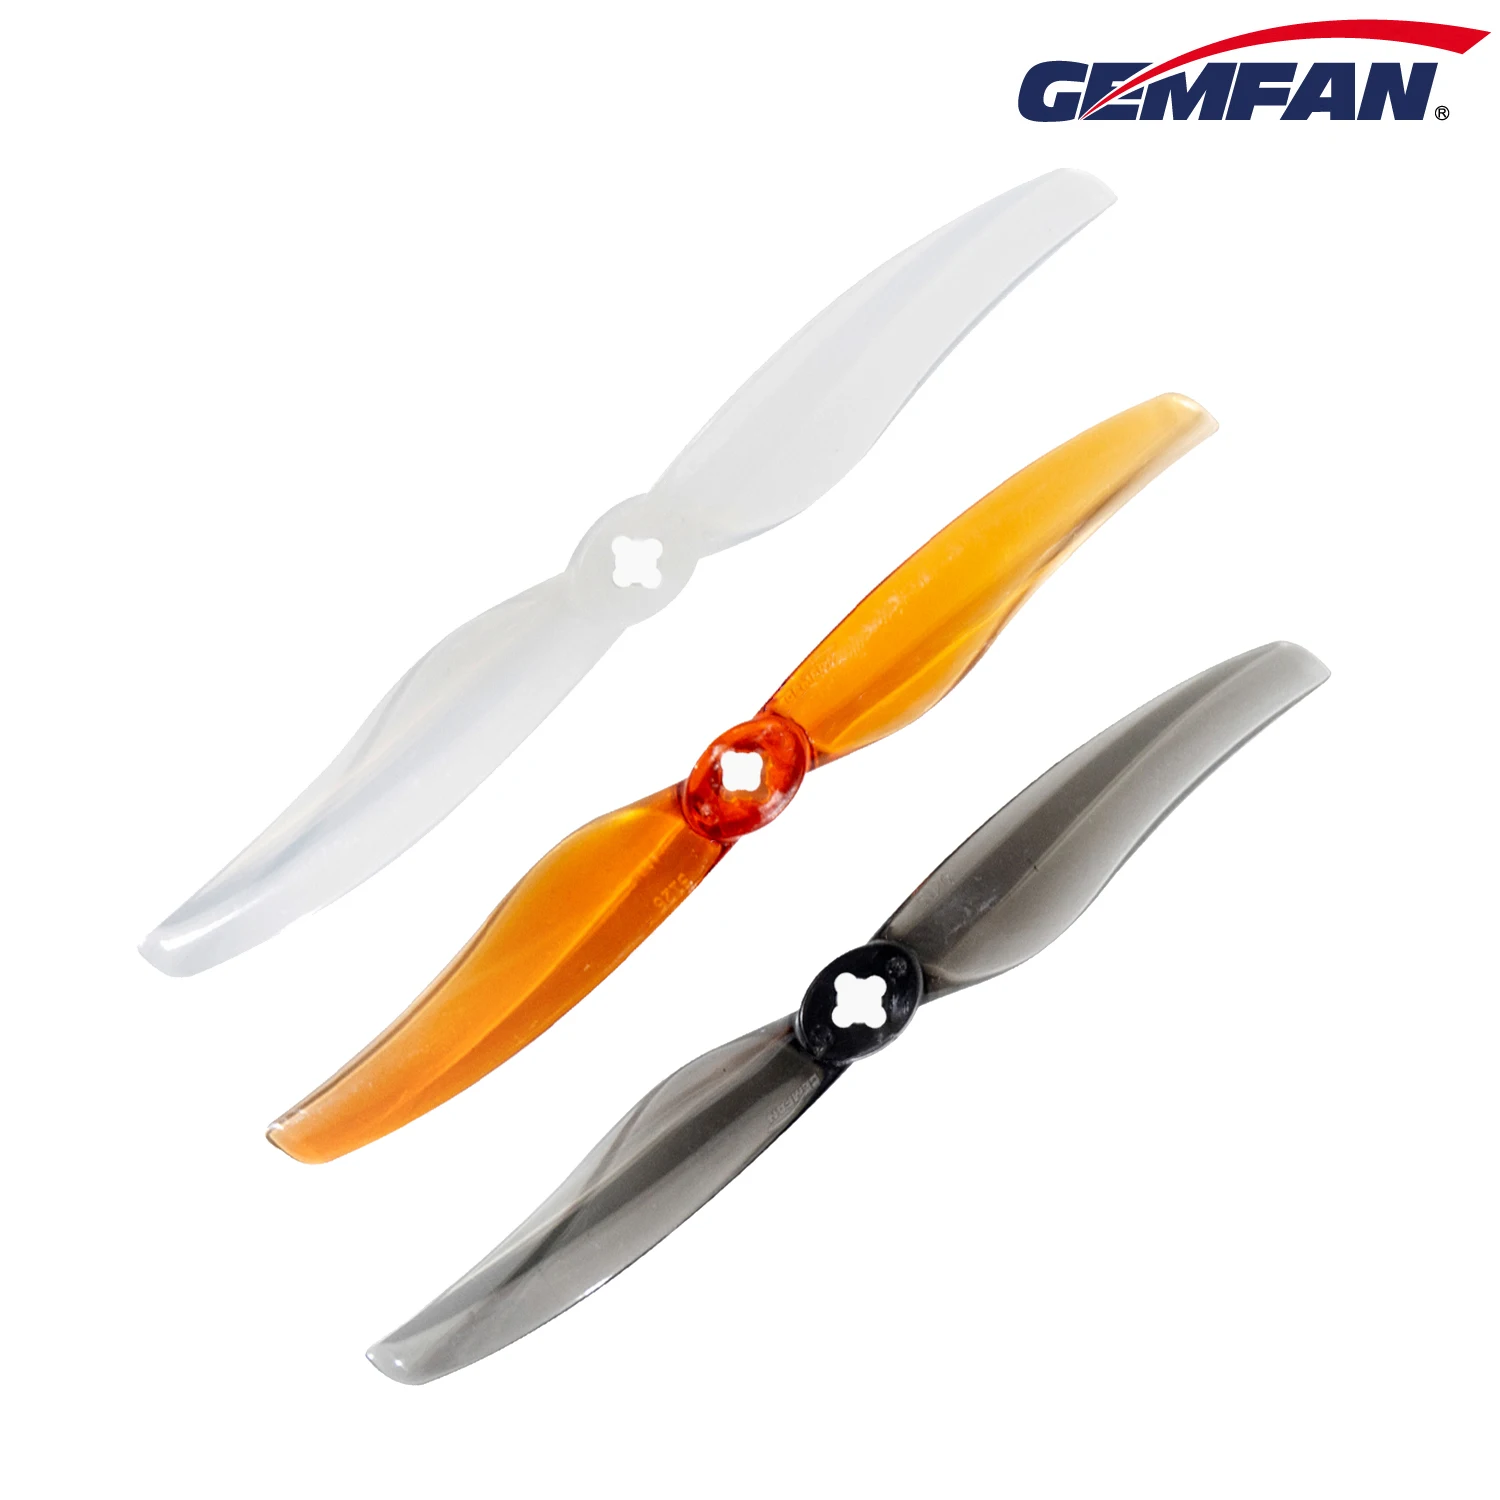 

24pcs/12pairs Gemfan 5126 Propeller 5 inch 2 Blade CW CCW Props LR5126-2 High Efficiency RC Helicopter FPV Accessory Spare Parts